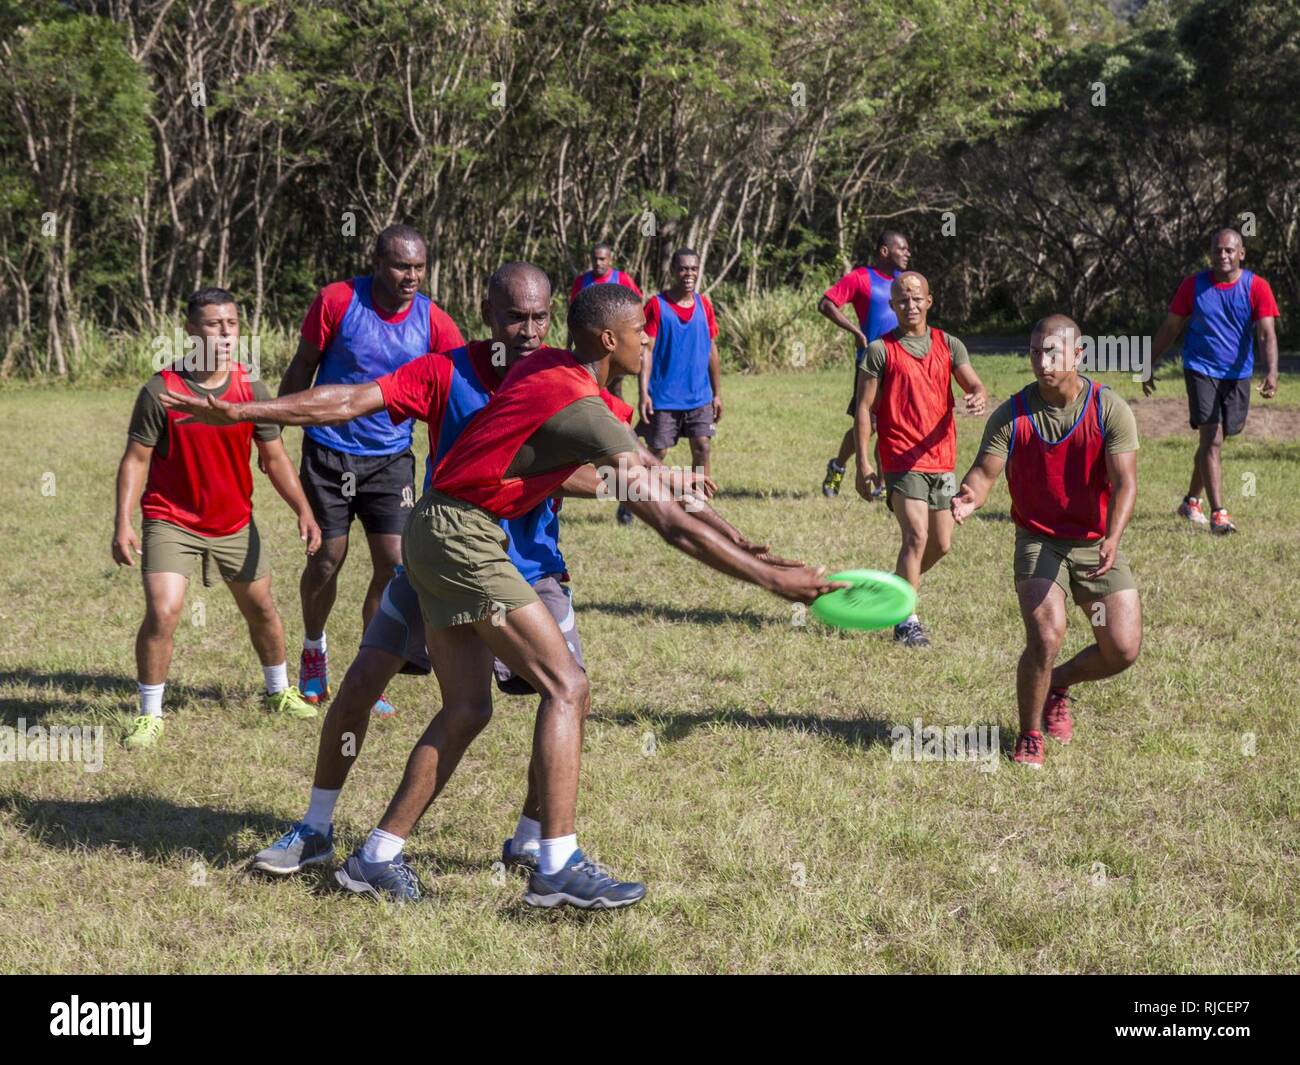 U.S. Marines with Combat Engineer Platoon, Task Force Koa Moana 16-4, play ultimate Frisbee with the Republic of Fiji Military Forces during Croix Du Sud in Plum, New Caledonia, Nov. 6, 2016. Croix Du Sud is a multi-national, humanitarian assistance disaster relief and non-combatant evacuation operation exercise conducted every two years to prepare nations in the event of a cyclone in the South Pacific. The Koa Moana exercise seeks to enhance senior military leader engagements between allied and partner nations in the Pacific with a collective interest in military-to-military relations. Stock Photo